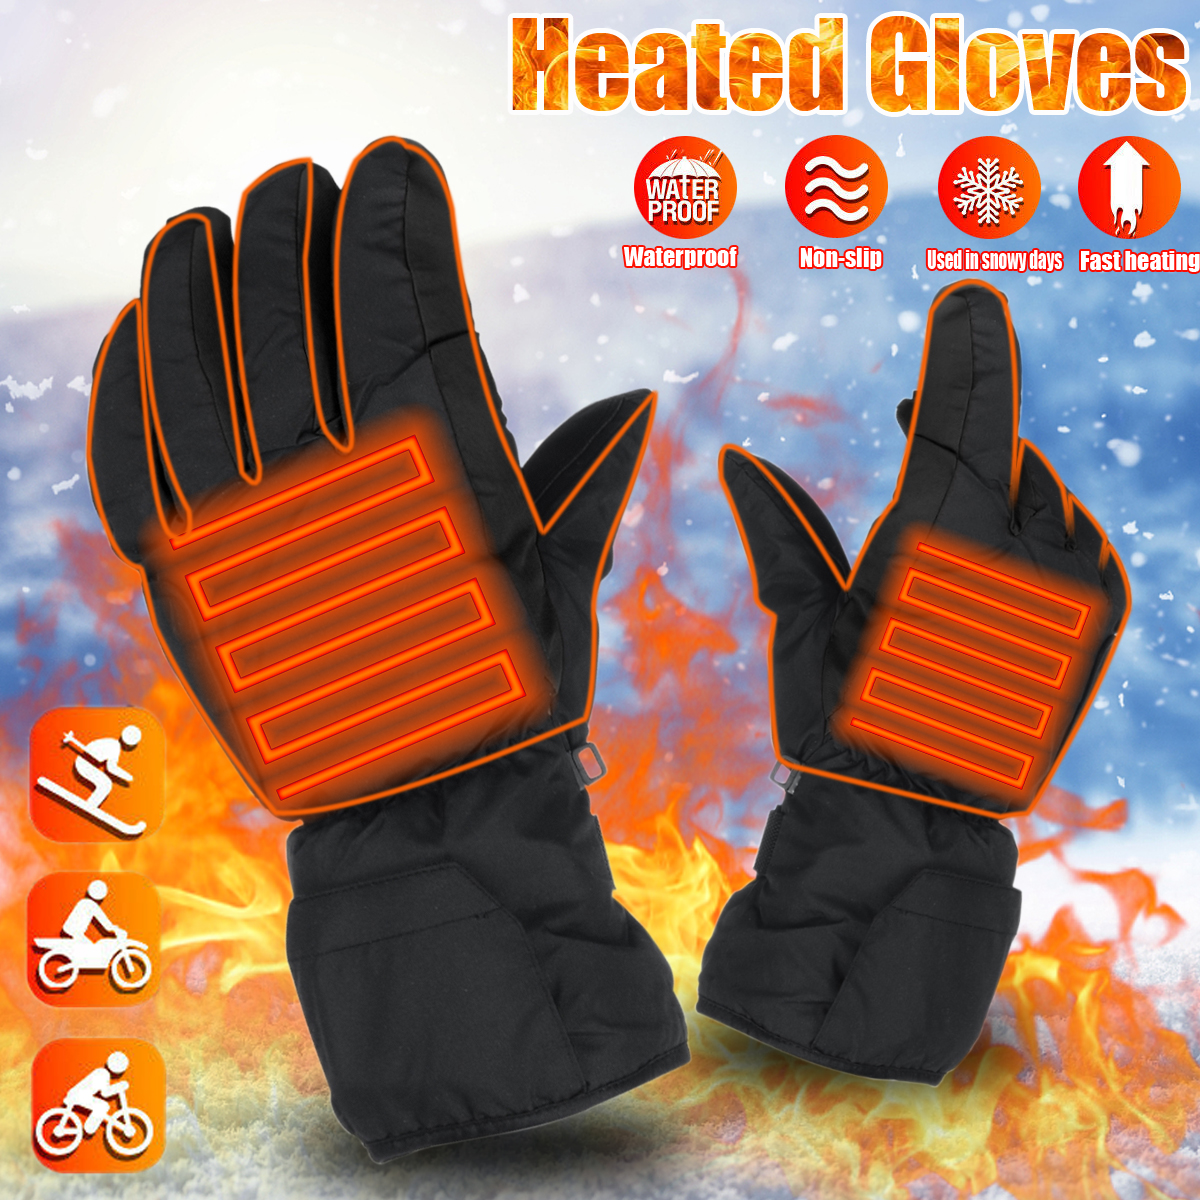 45V-Smart-Electric-Heated-Gloves-Winter-Ski-Cycling-Keep-Warm-Battery-Powered-Heating-Gloves-5-Finge-1771505-2